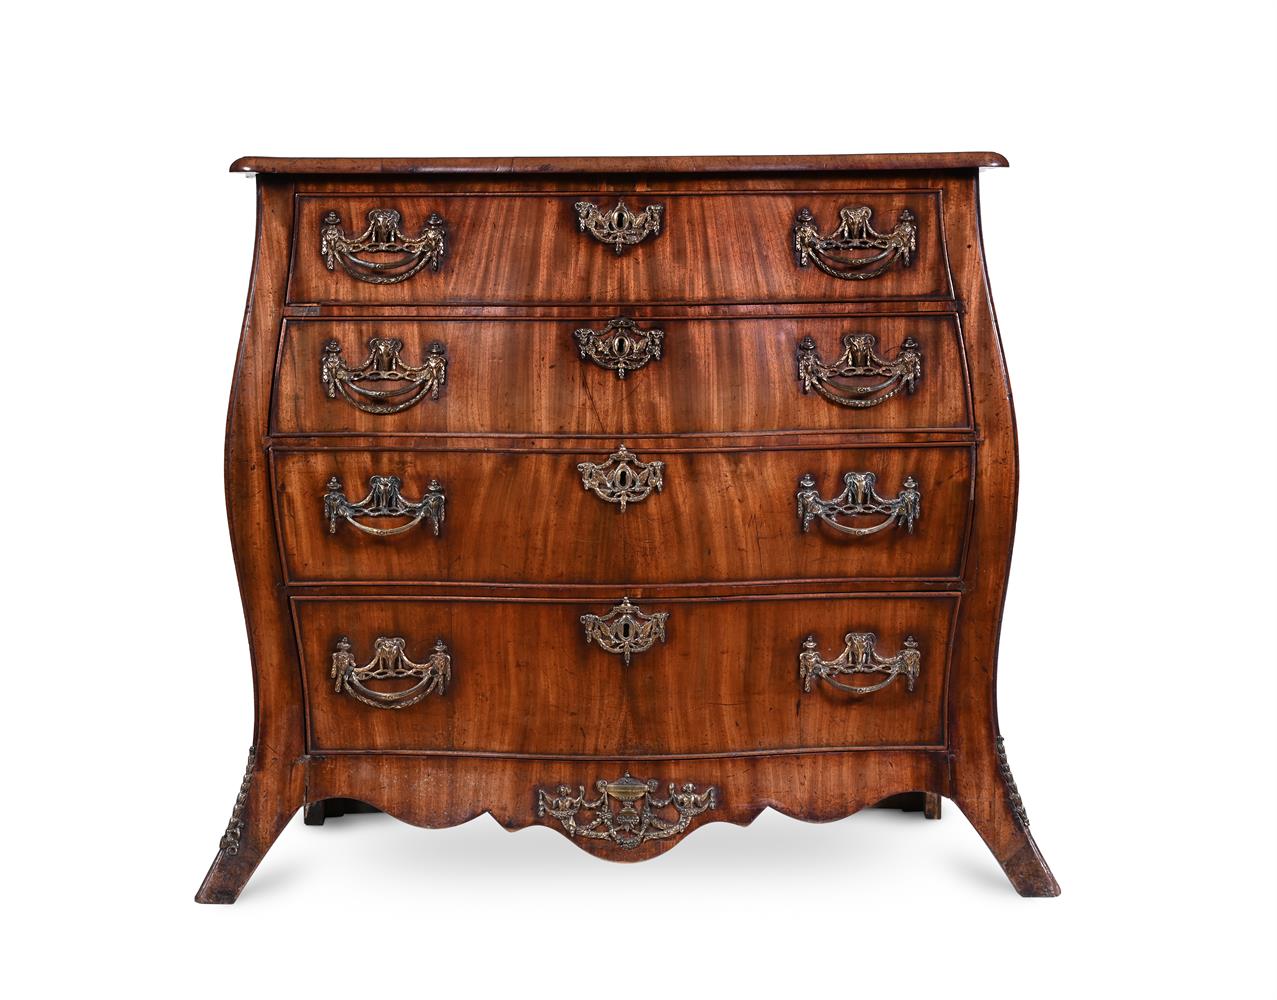 A DUTCH GILT METAL MOUNTED MAHOGANY BOMBE COMMODE, 18TH CENTURY - Image 2 of 2